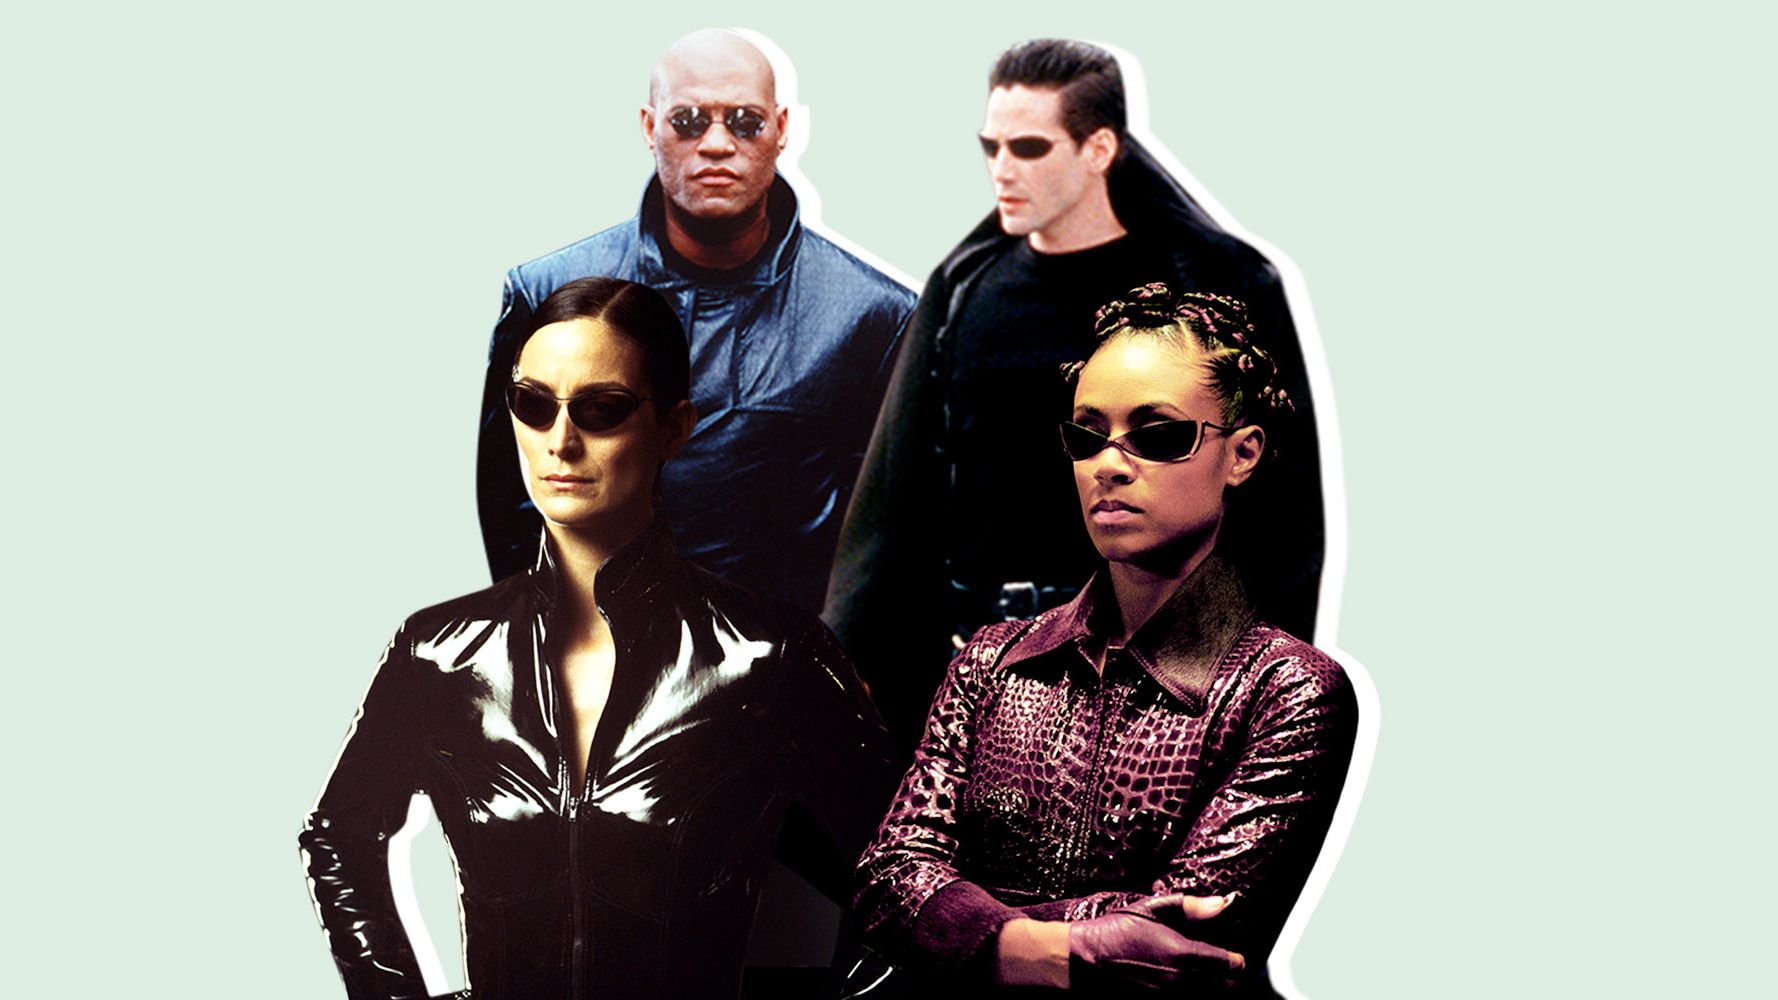 How to Watch All the Matrix Movies in Chronological Plot Order